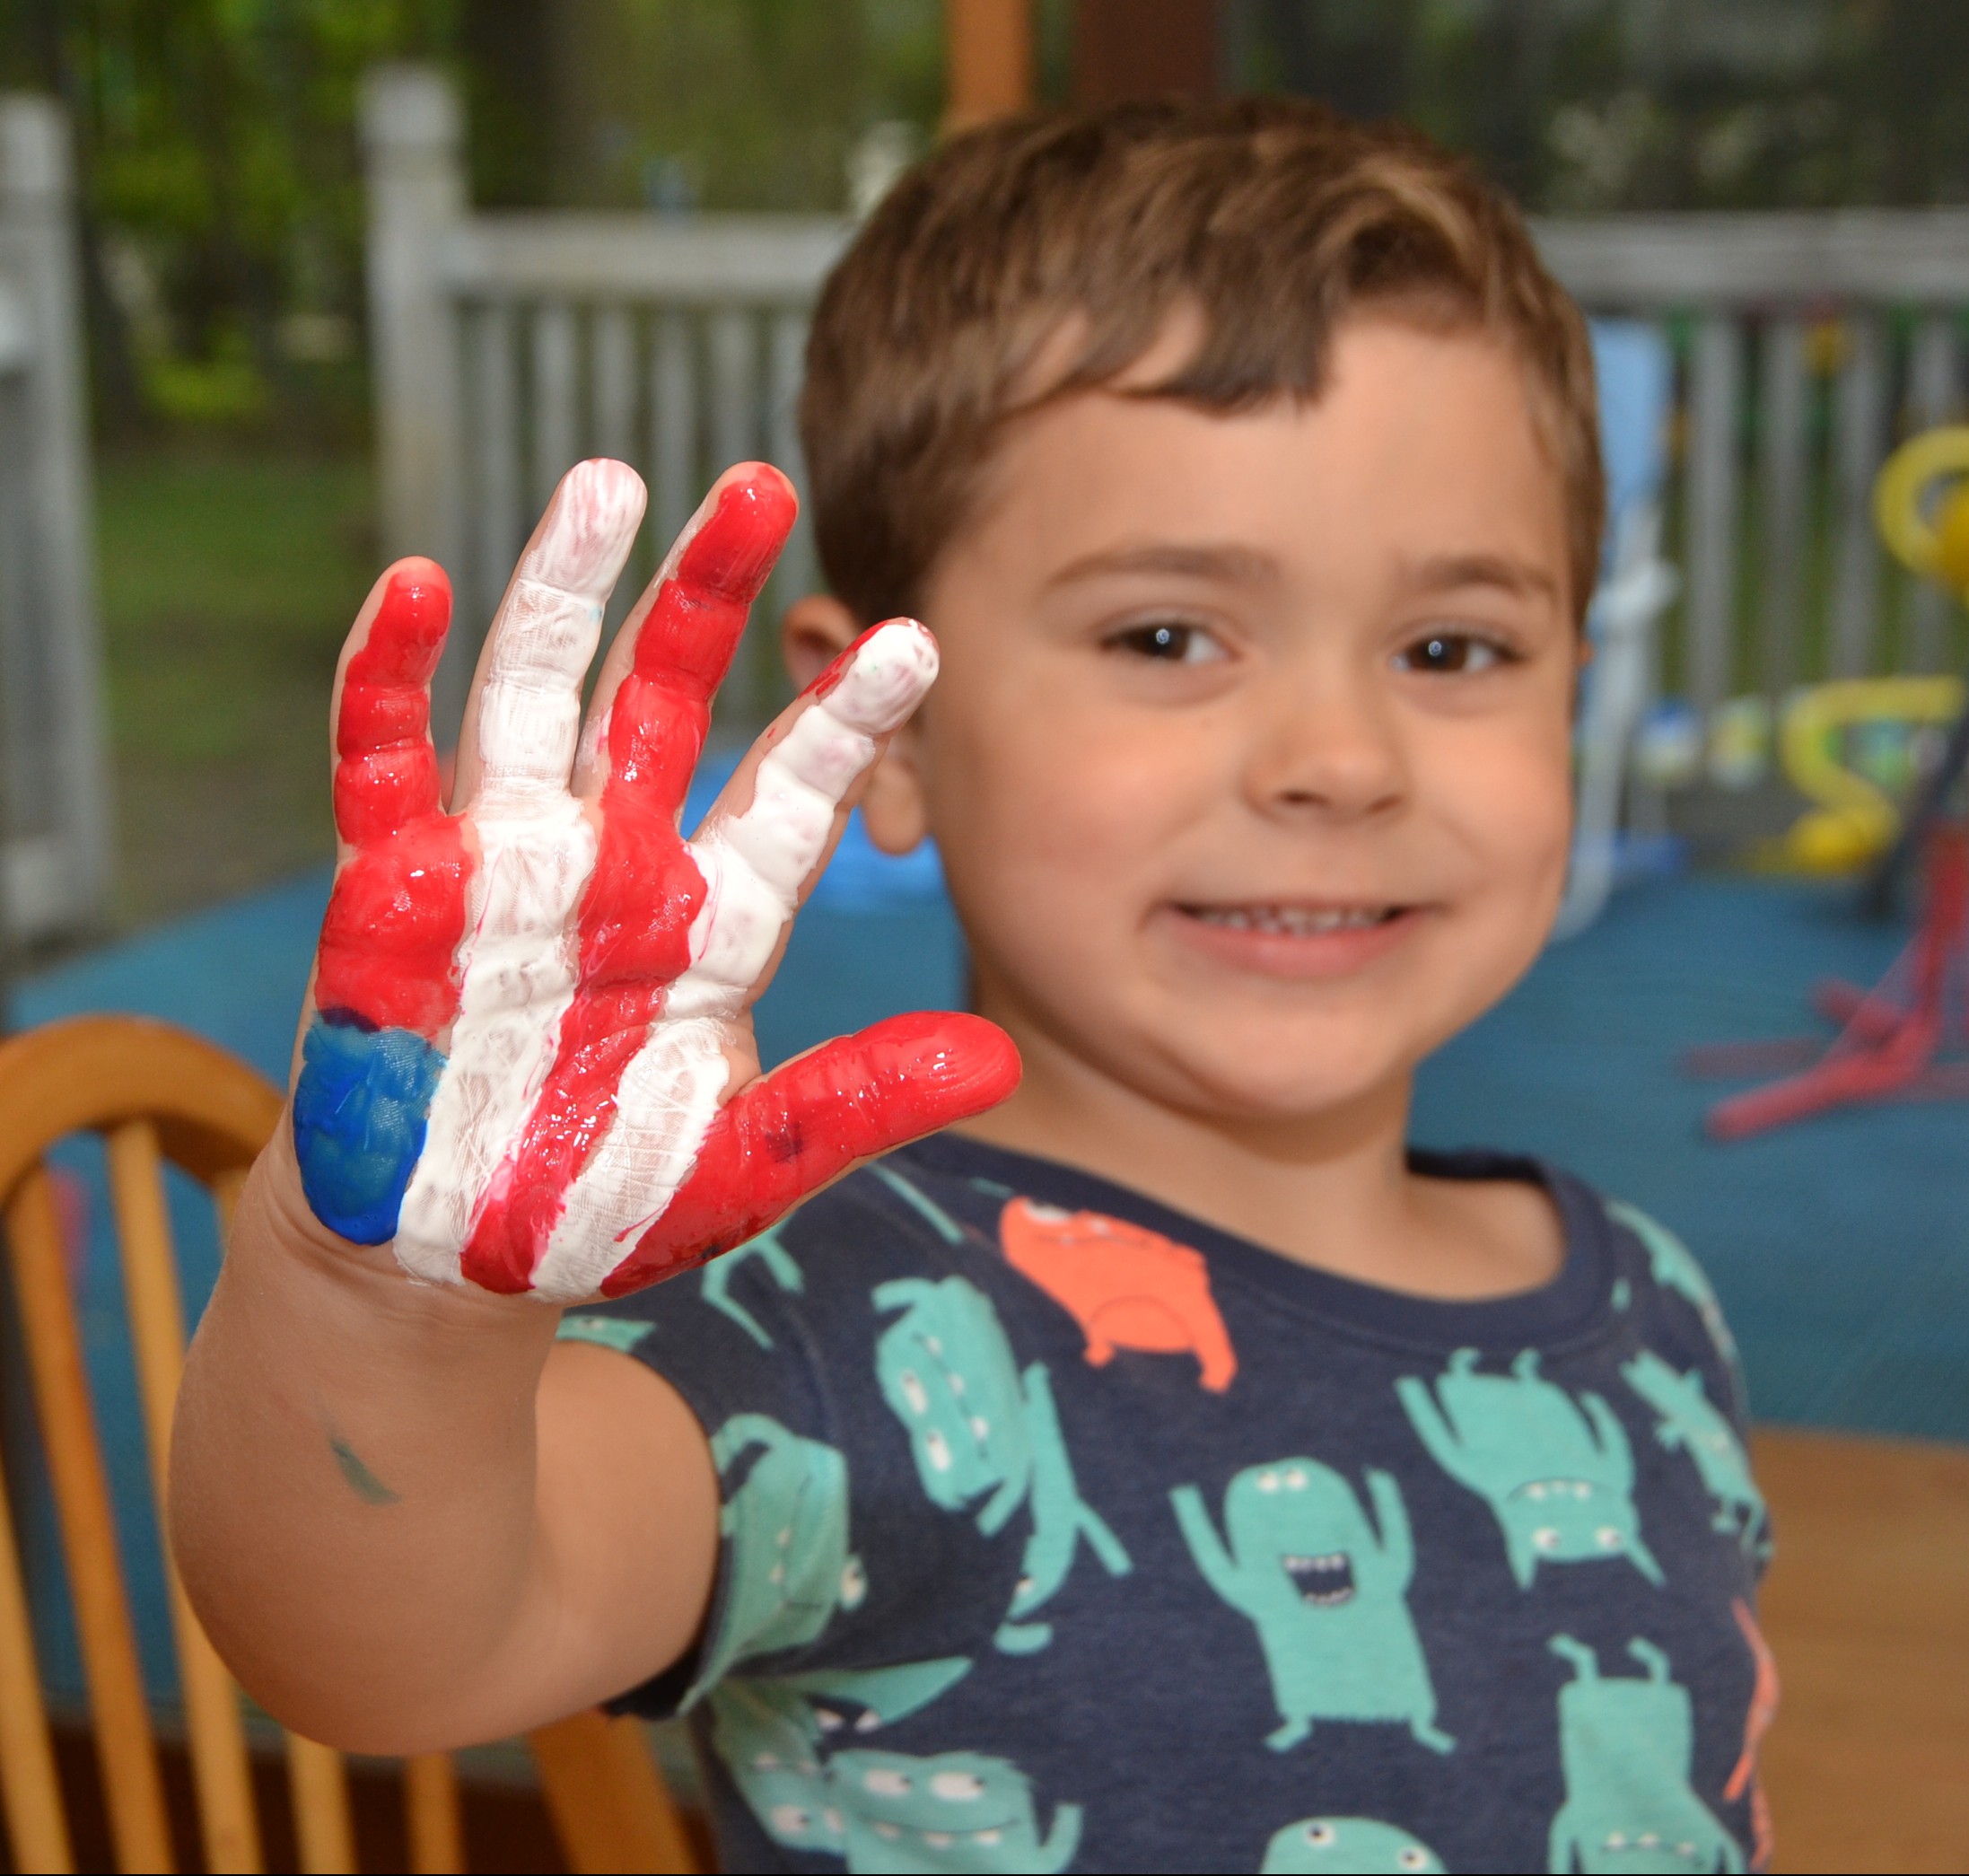 Fourth of July Crafts for Kids